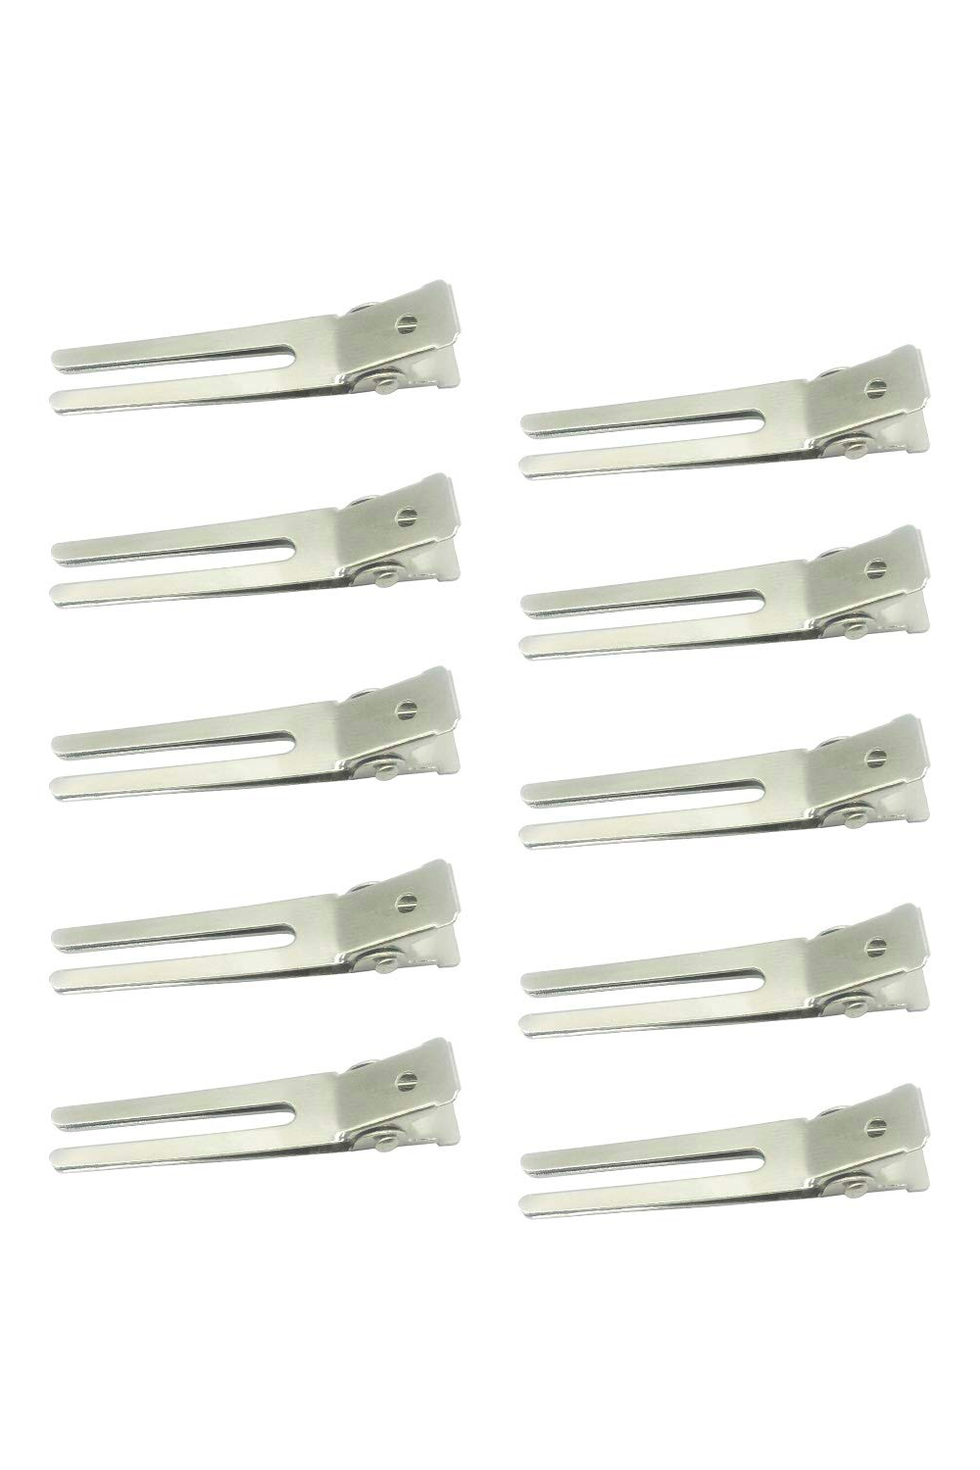 Hyhp 100 Pieces 1.8 Inch Hairdressing Double Prong Curl Clips